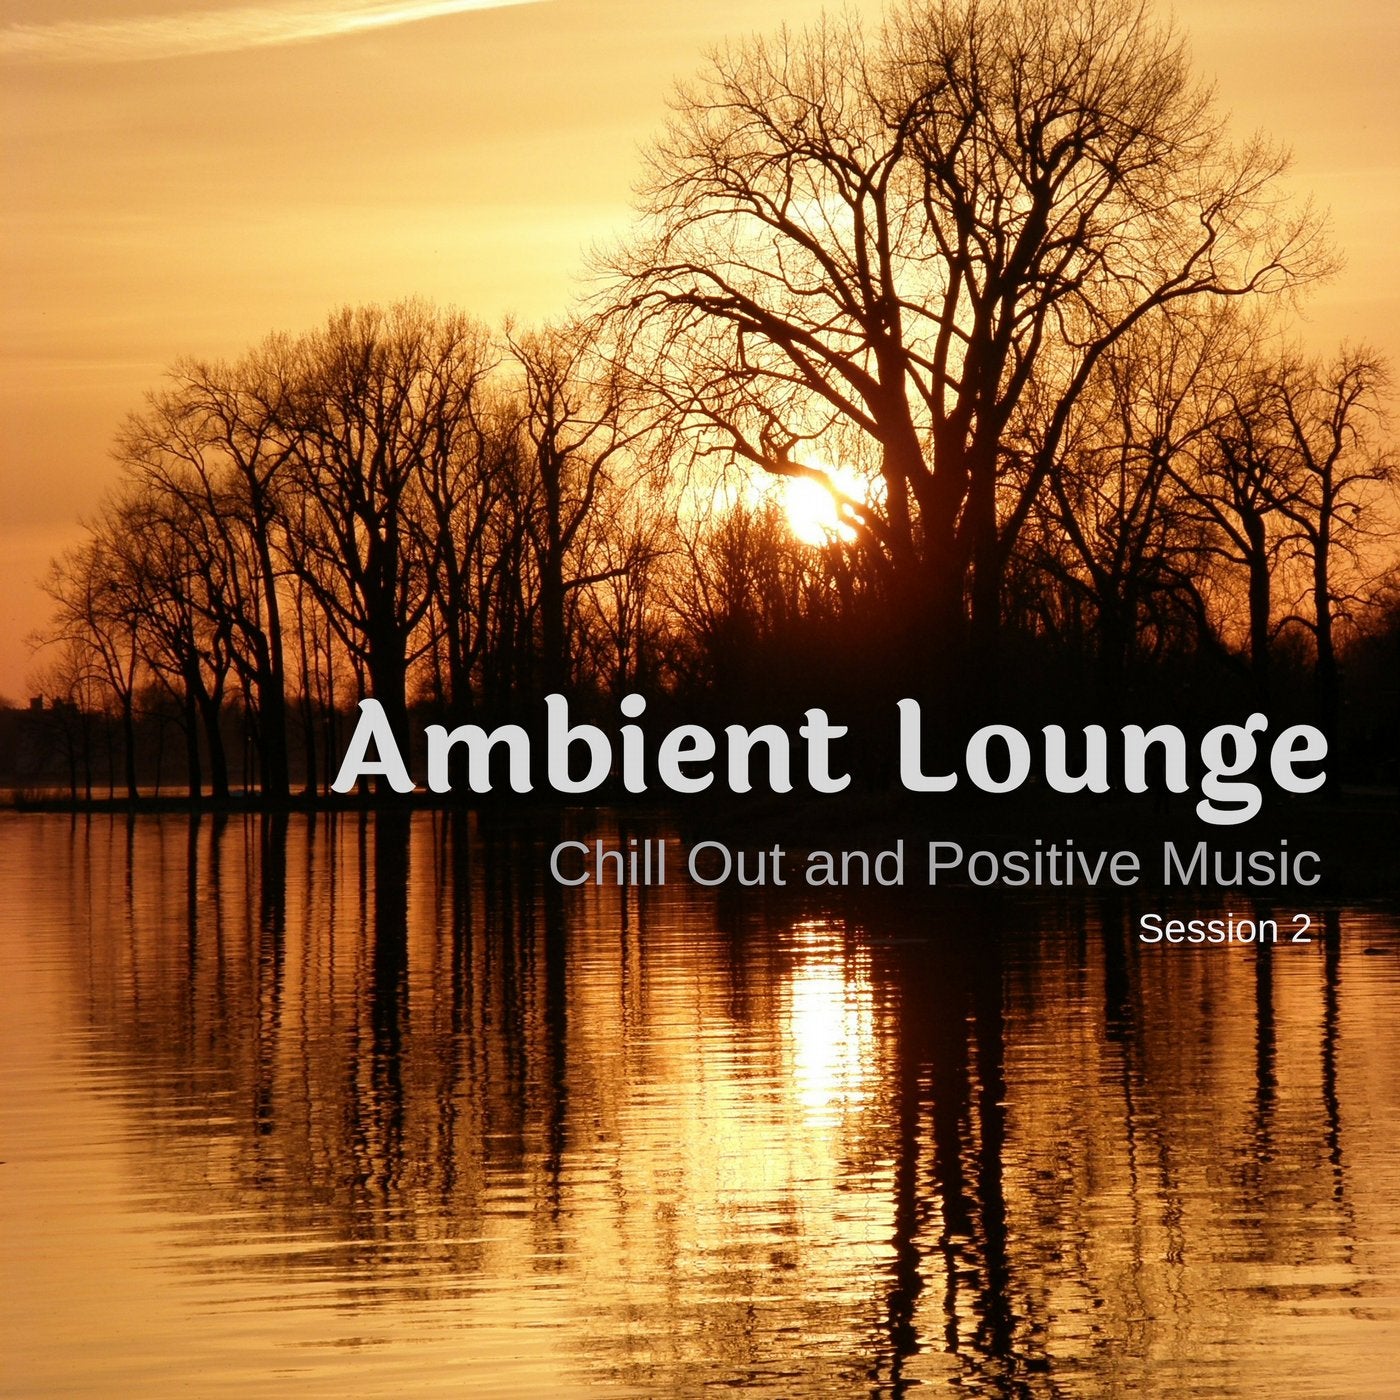 Ambient Lounge - Chill Out And Positive Music - Session 2